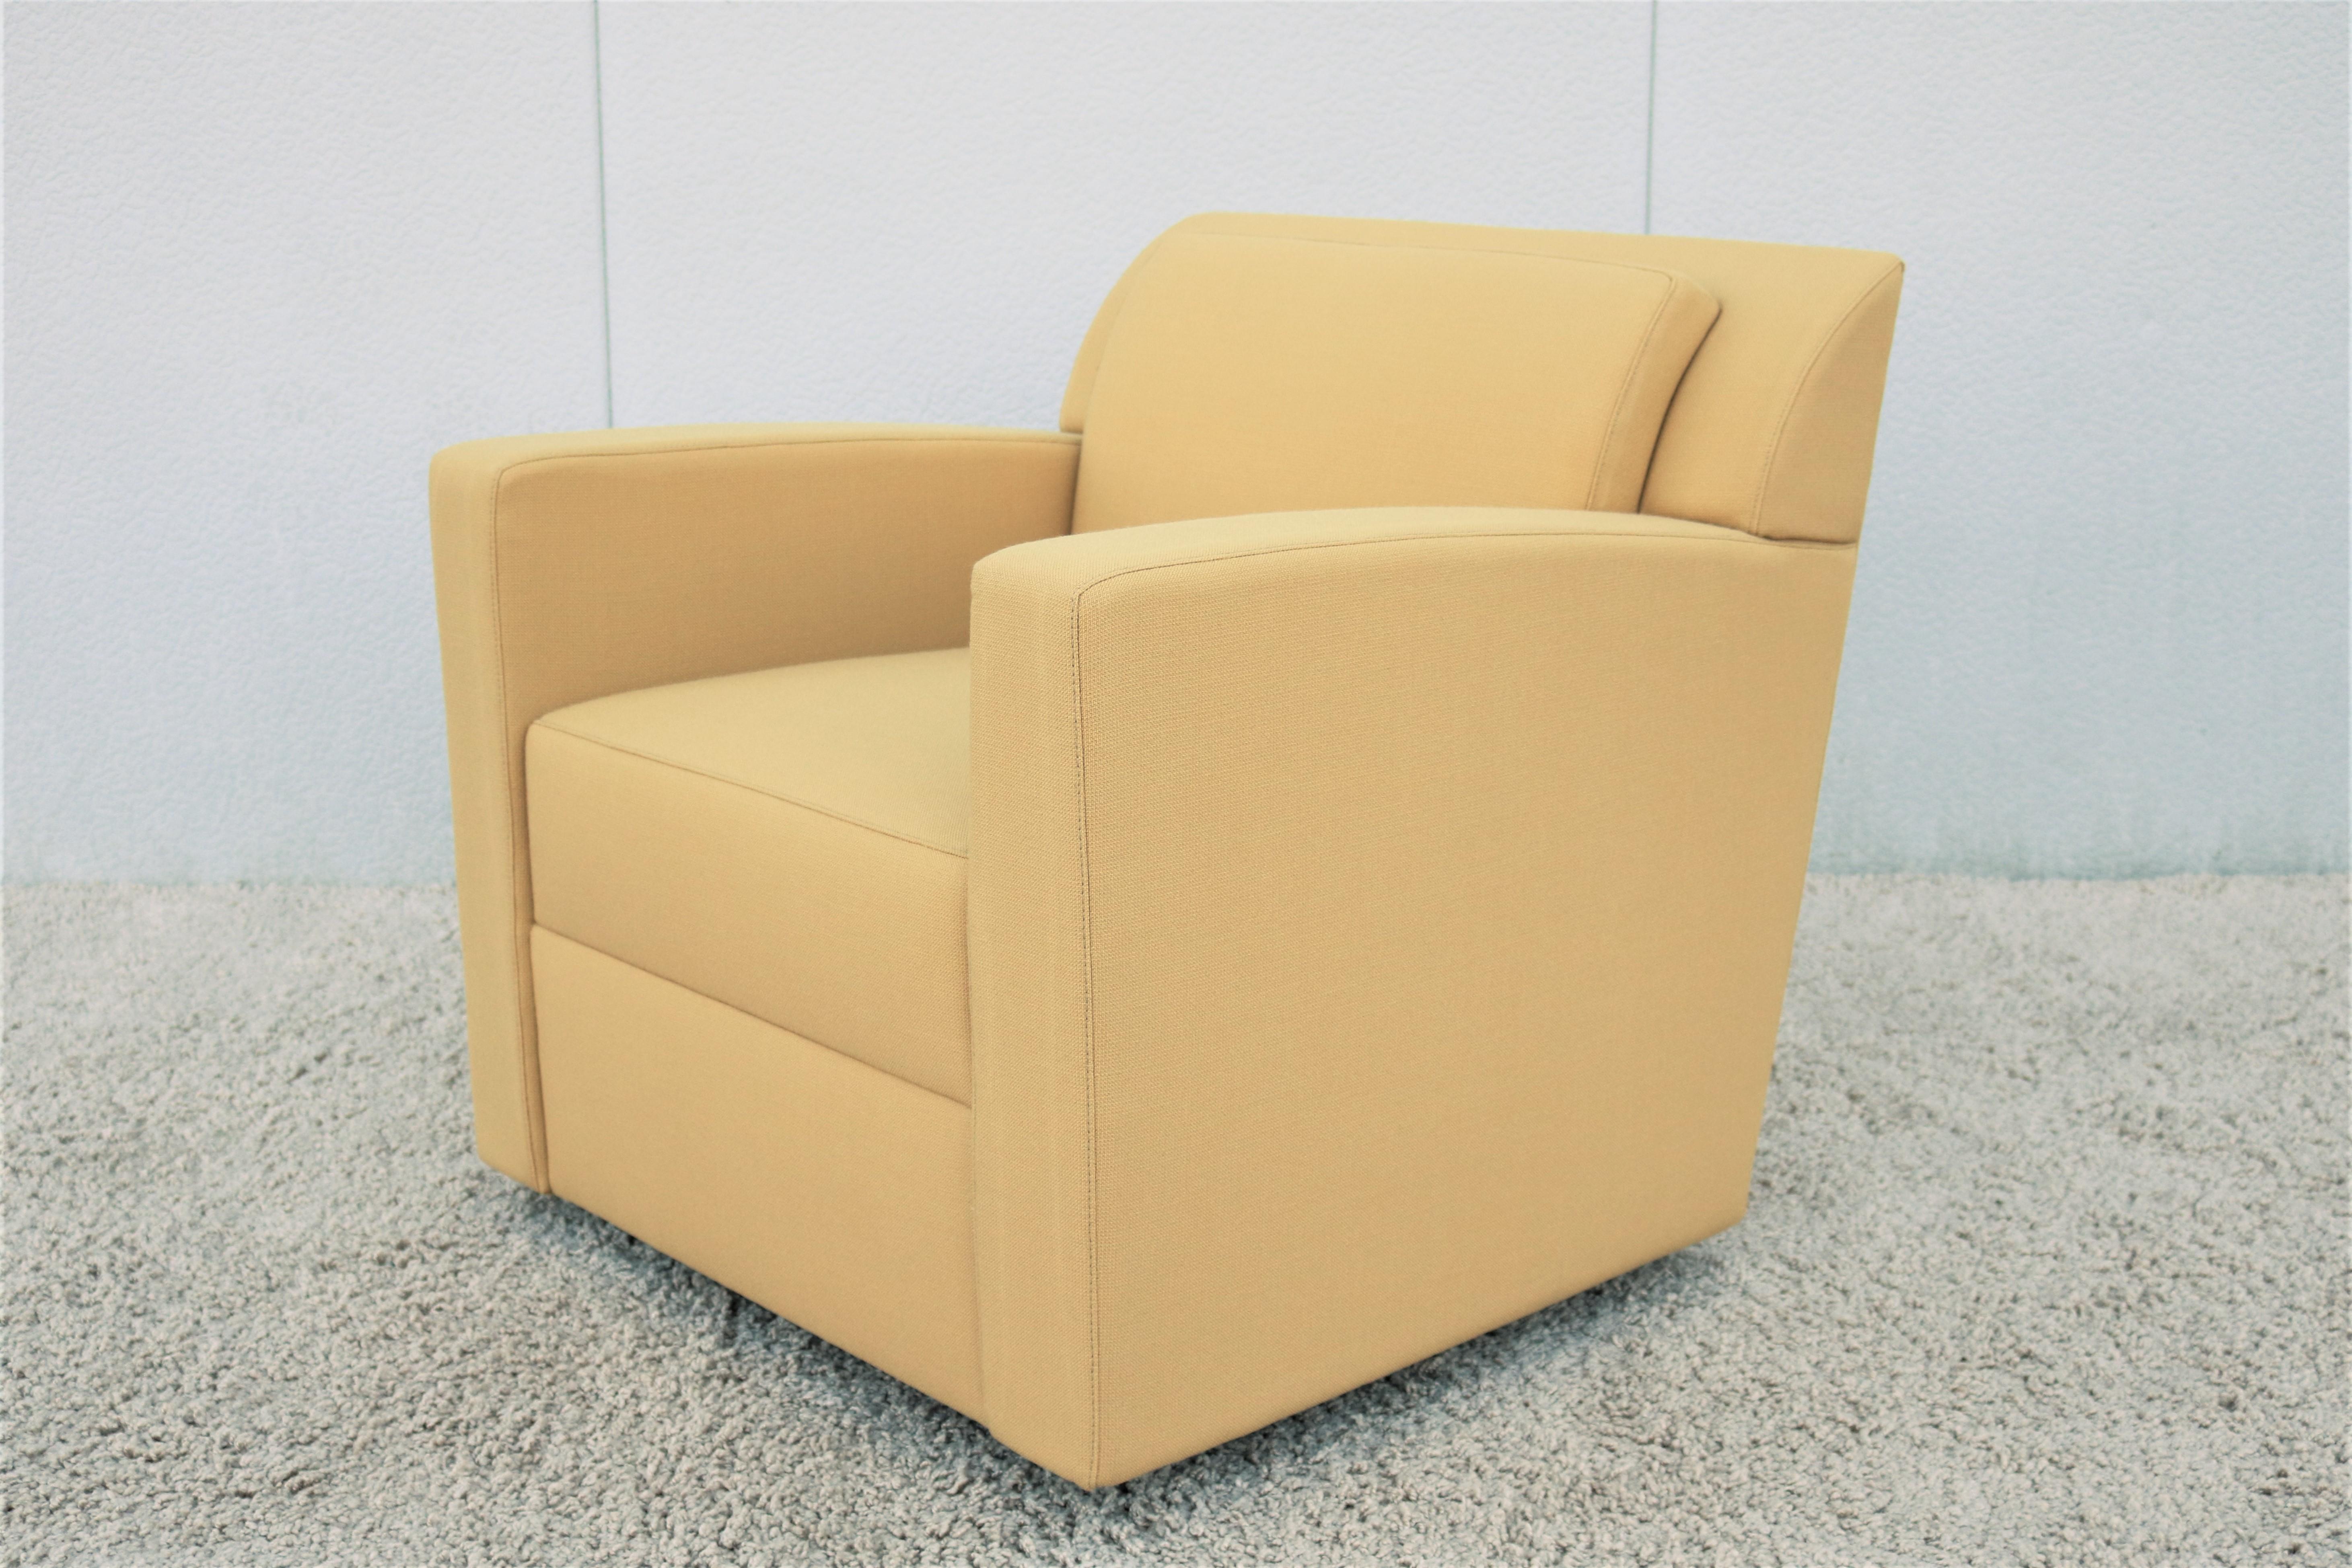 Fabulous contemporary modern brand-new Entrada lounge chair / club chair. Beautifully designed by Brian Cox for Bernhardt design, the chair delivers relaxed comfort and exceptional support. Great for residential and commercial use.

Please note I